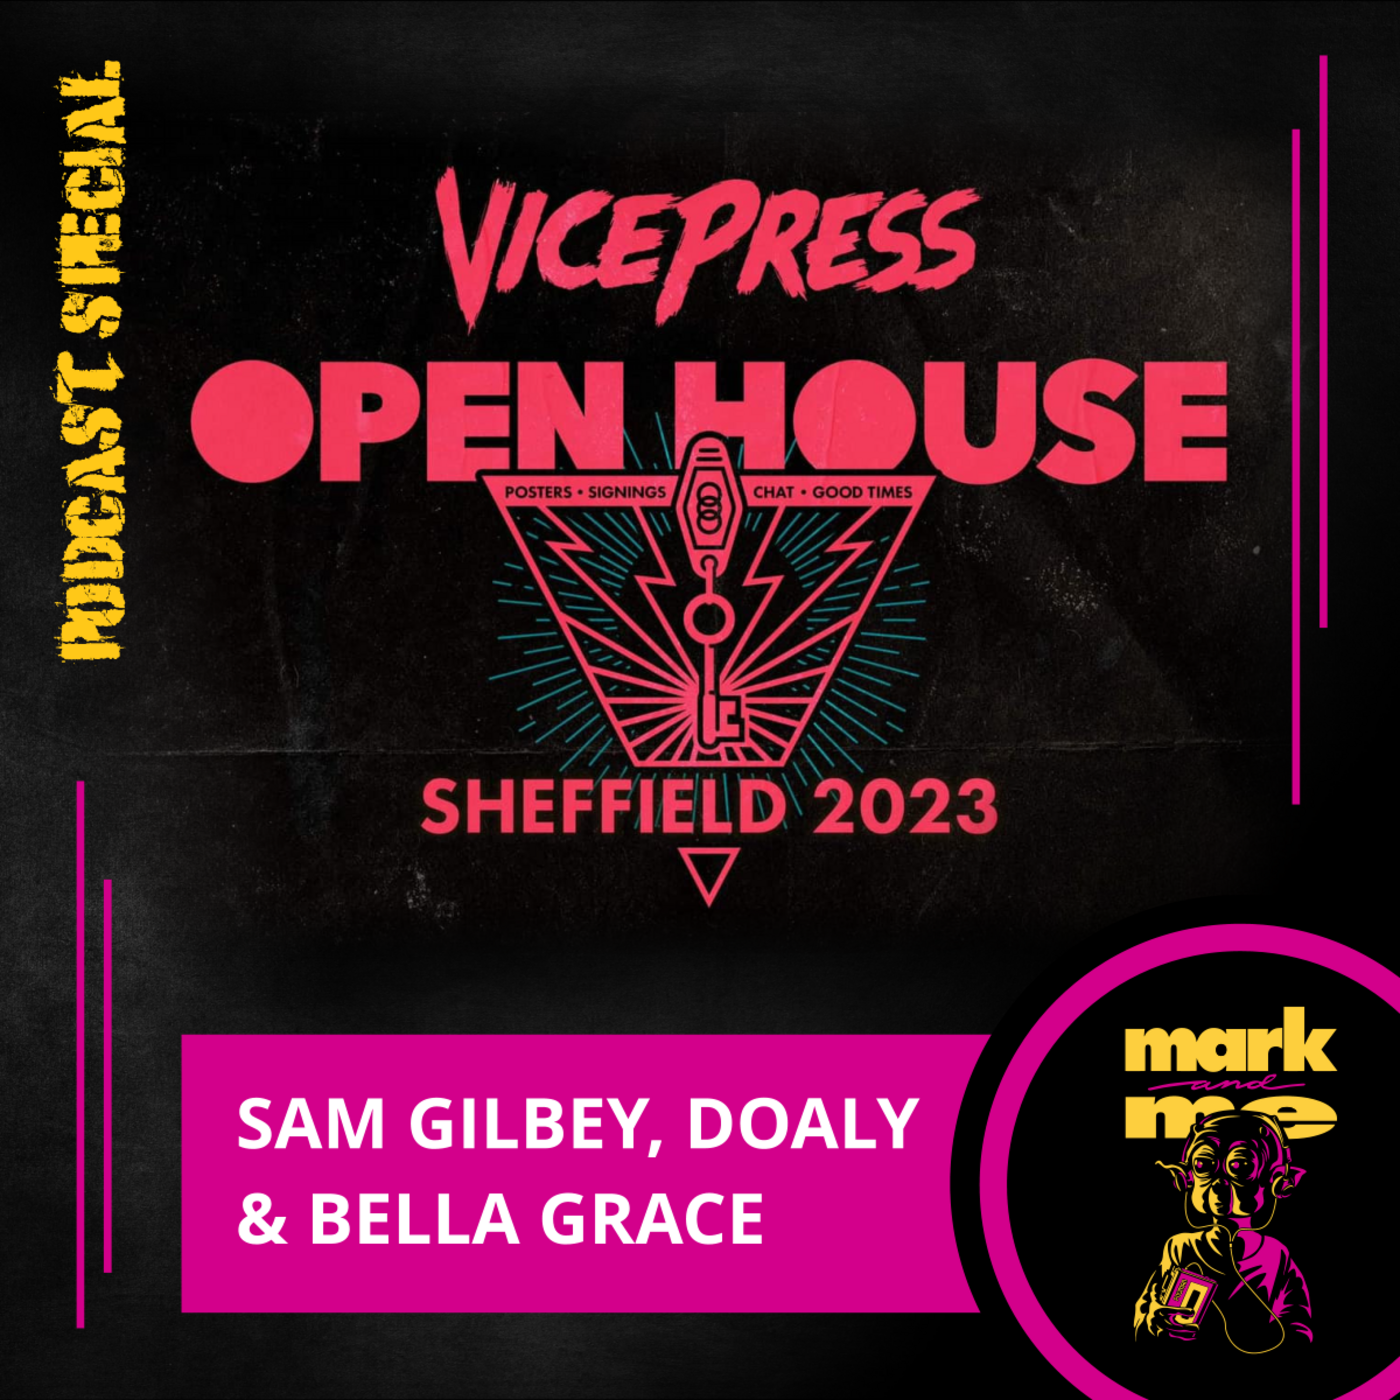 Episode 279: Vice Press Open House Special - Sam Gilbey, Doaly and Bella Grace